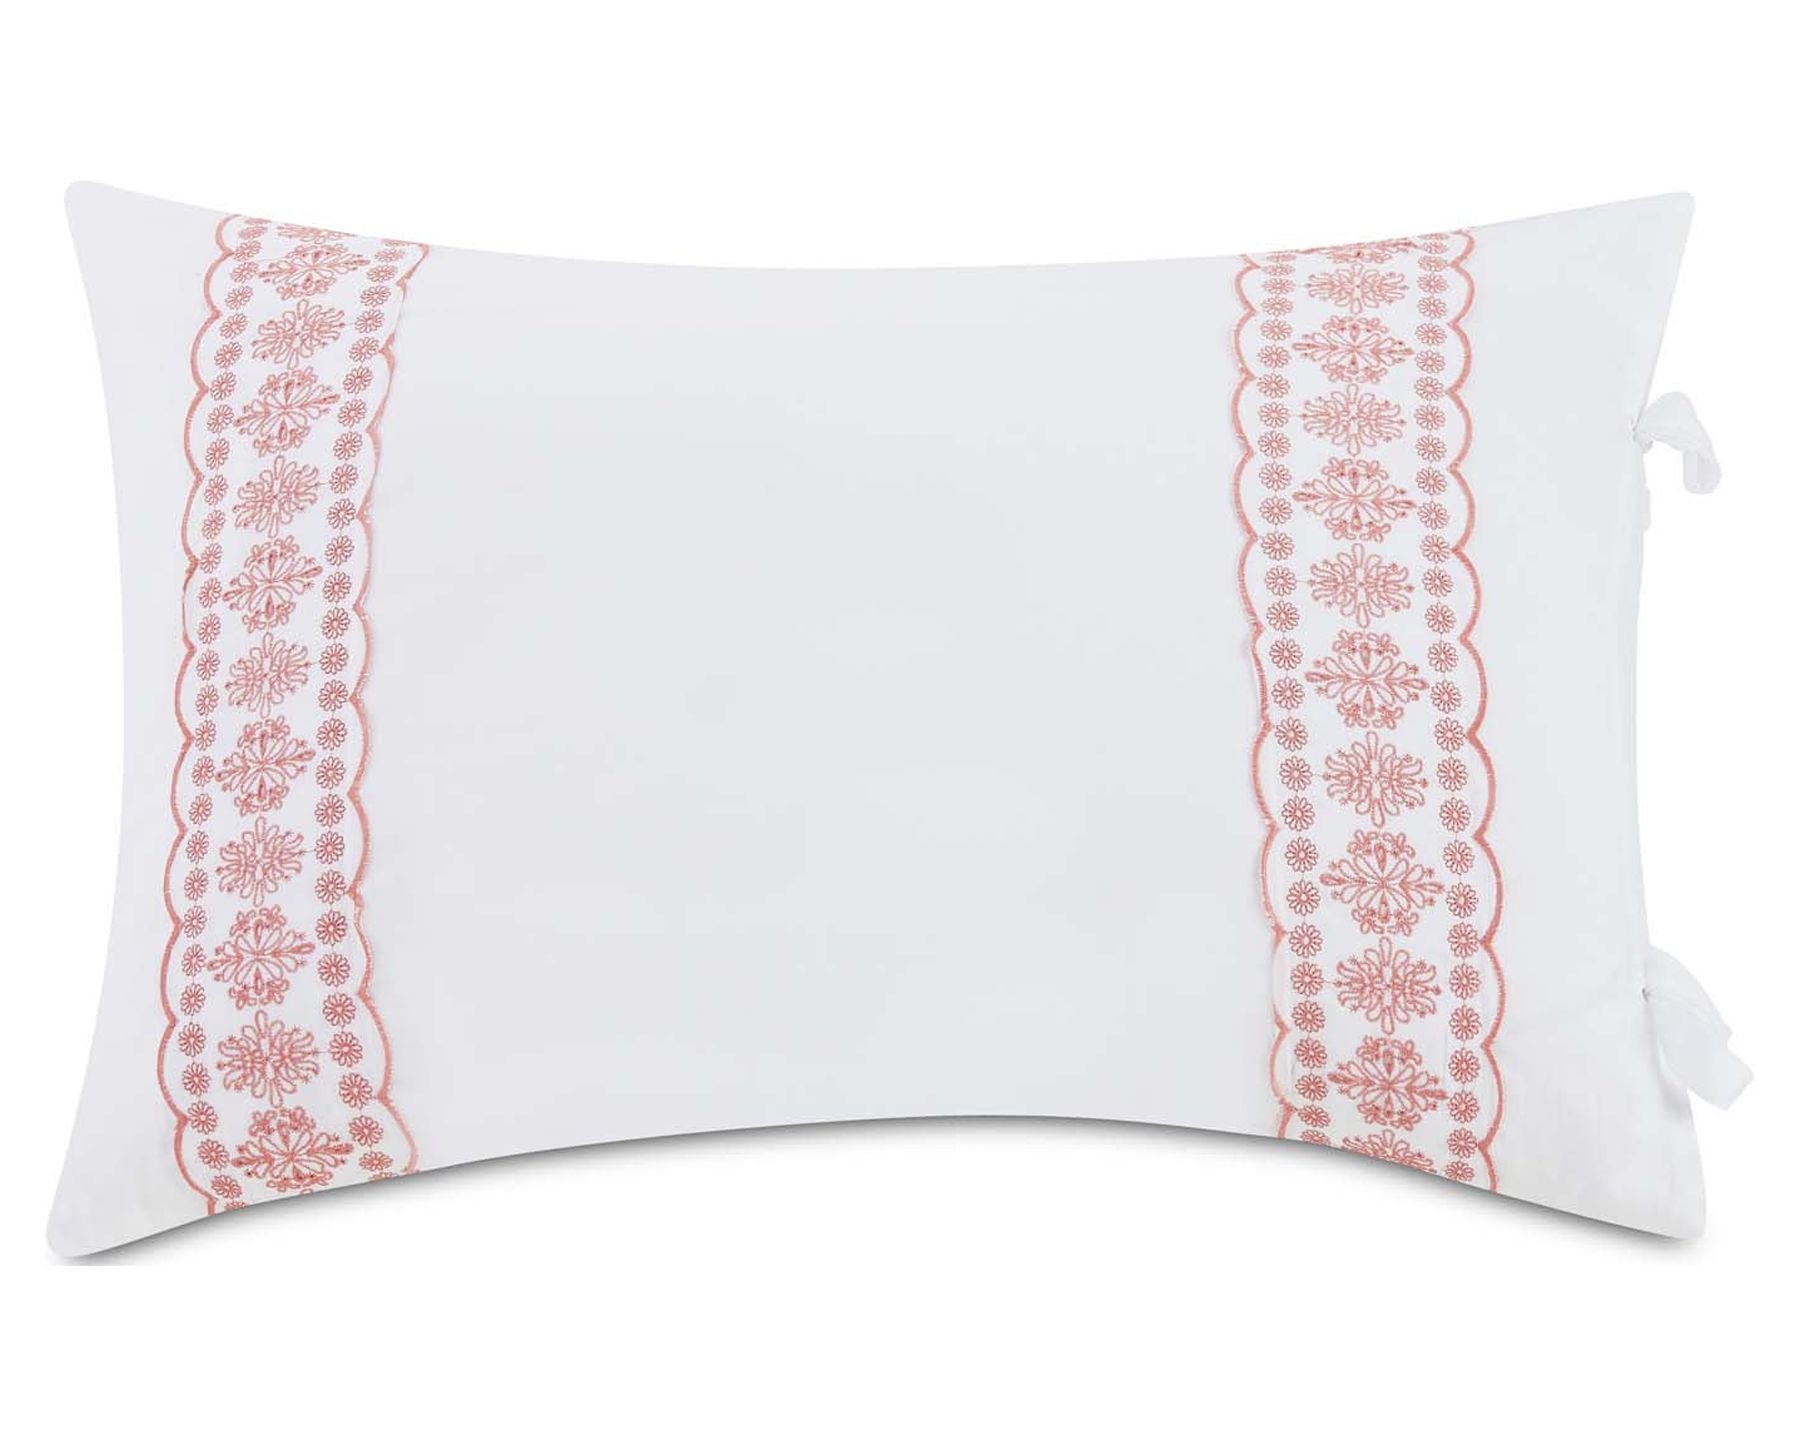 The Pioneer Woman White Cotton Eyelet 4-Piece Comforter Set, Full / Queen - image 7 of 9